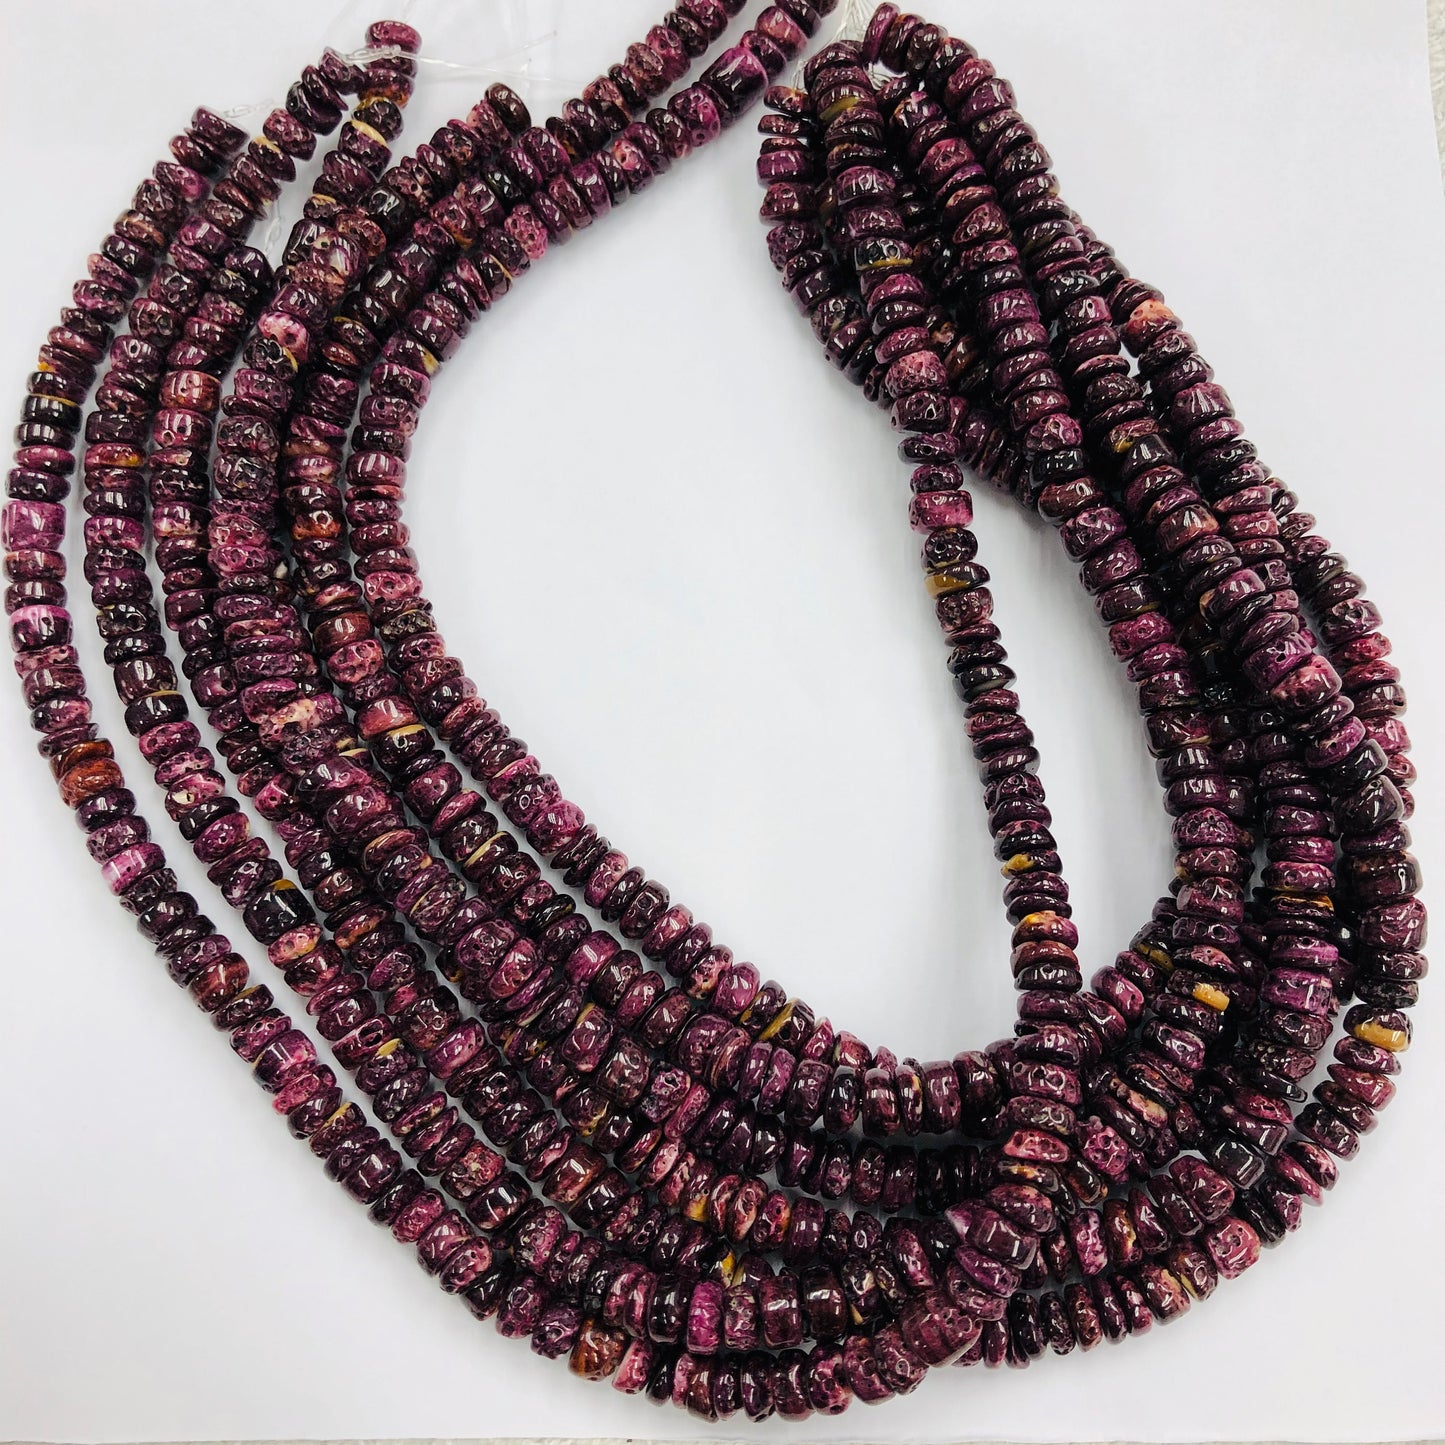 Rare Purple Spiny Oyster Shell Rondisc 7-8mm Strand 16"inches